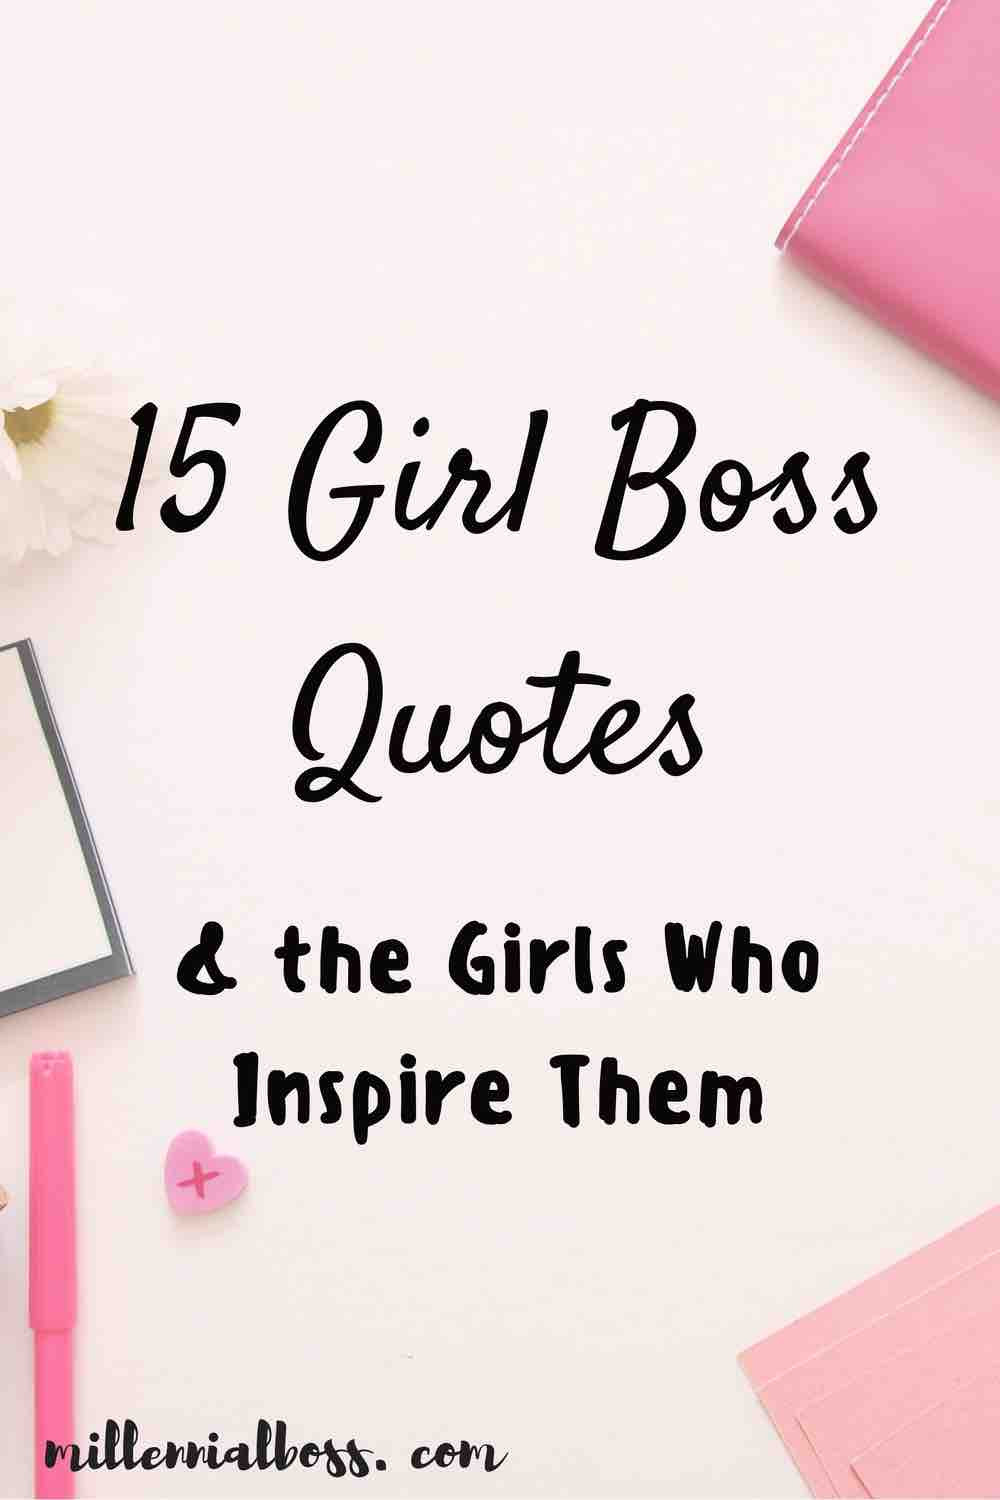 Inspirational Quotes For Boss
 15 Girl Boss Quotes & the Girls Who Inspire Them